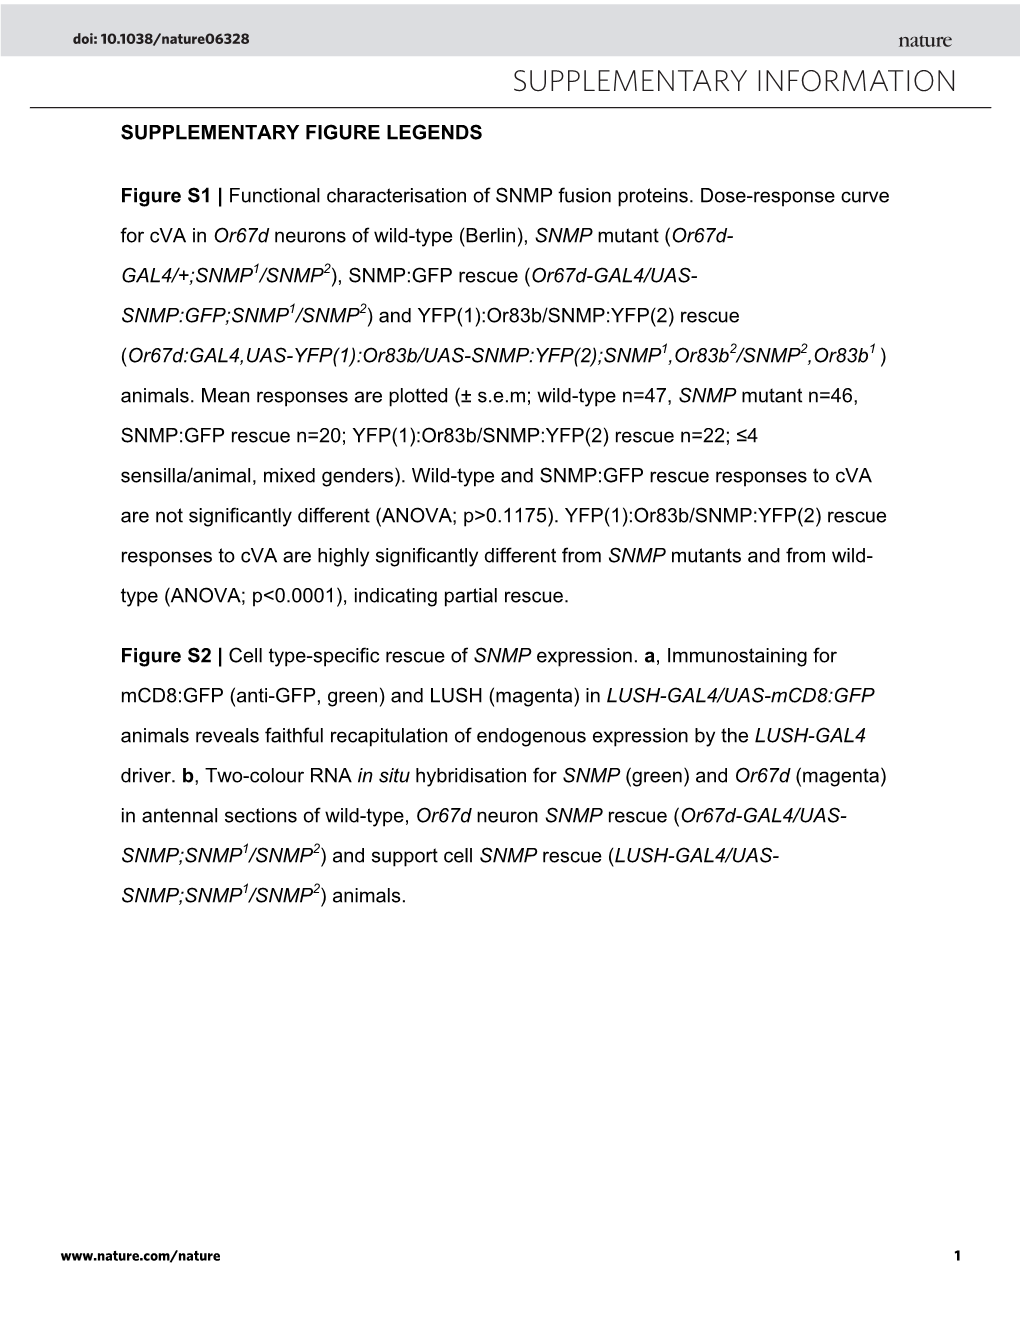 Supplementary Figure S1 Functional Characterisation of Snmp:GFP